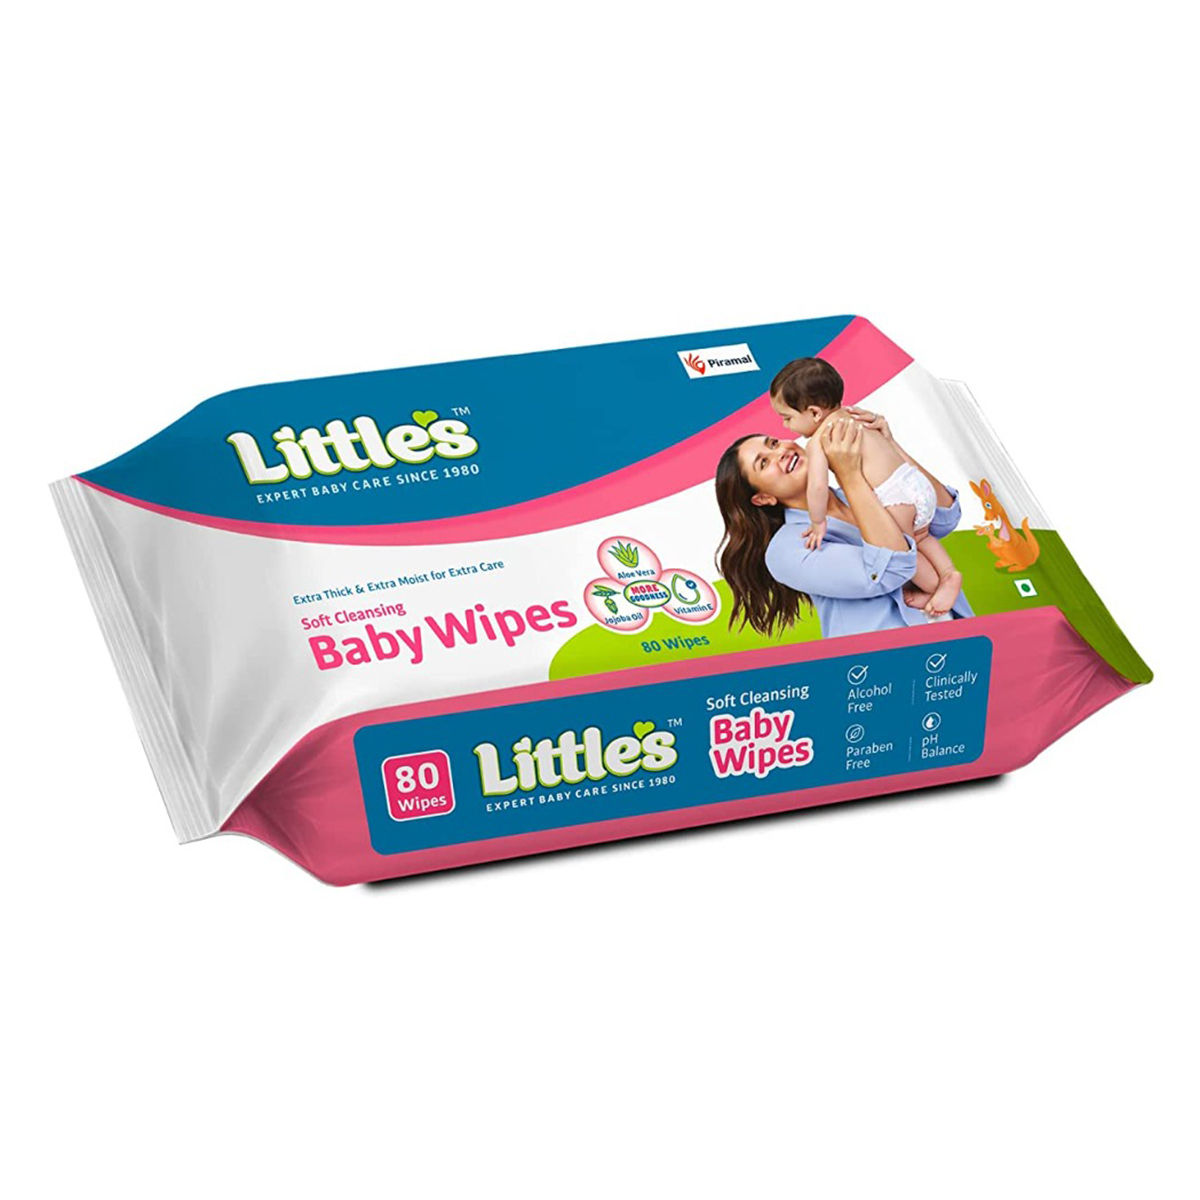 Buy Little's Soft Cleansing Baby Wipes, 80 Count Online